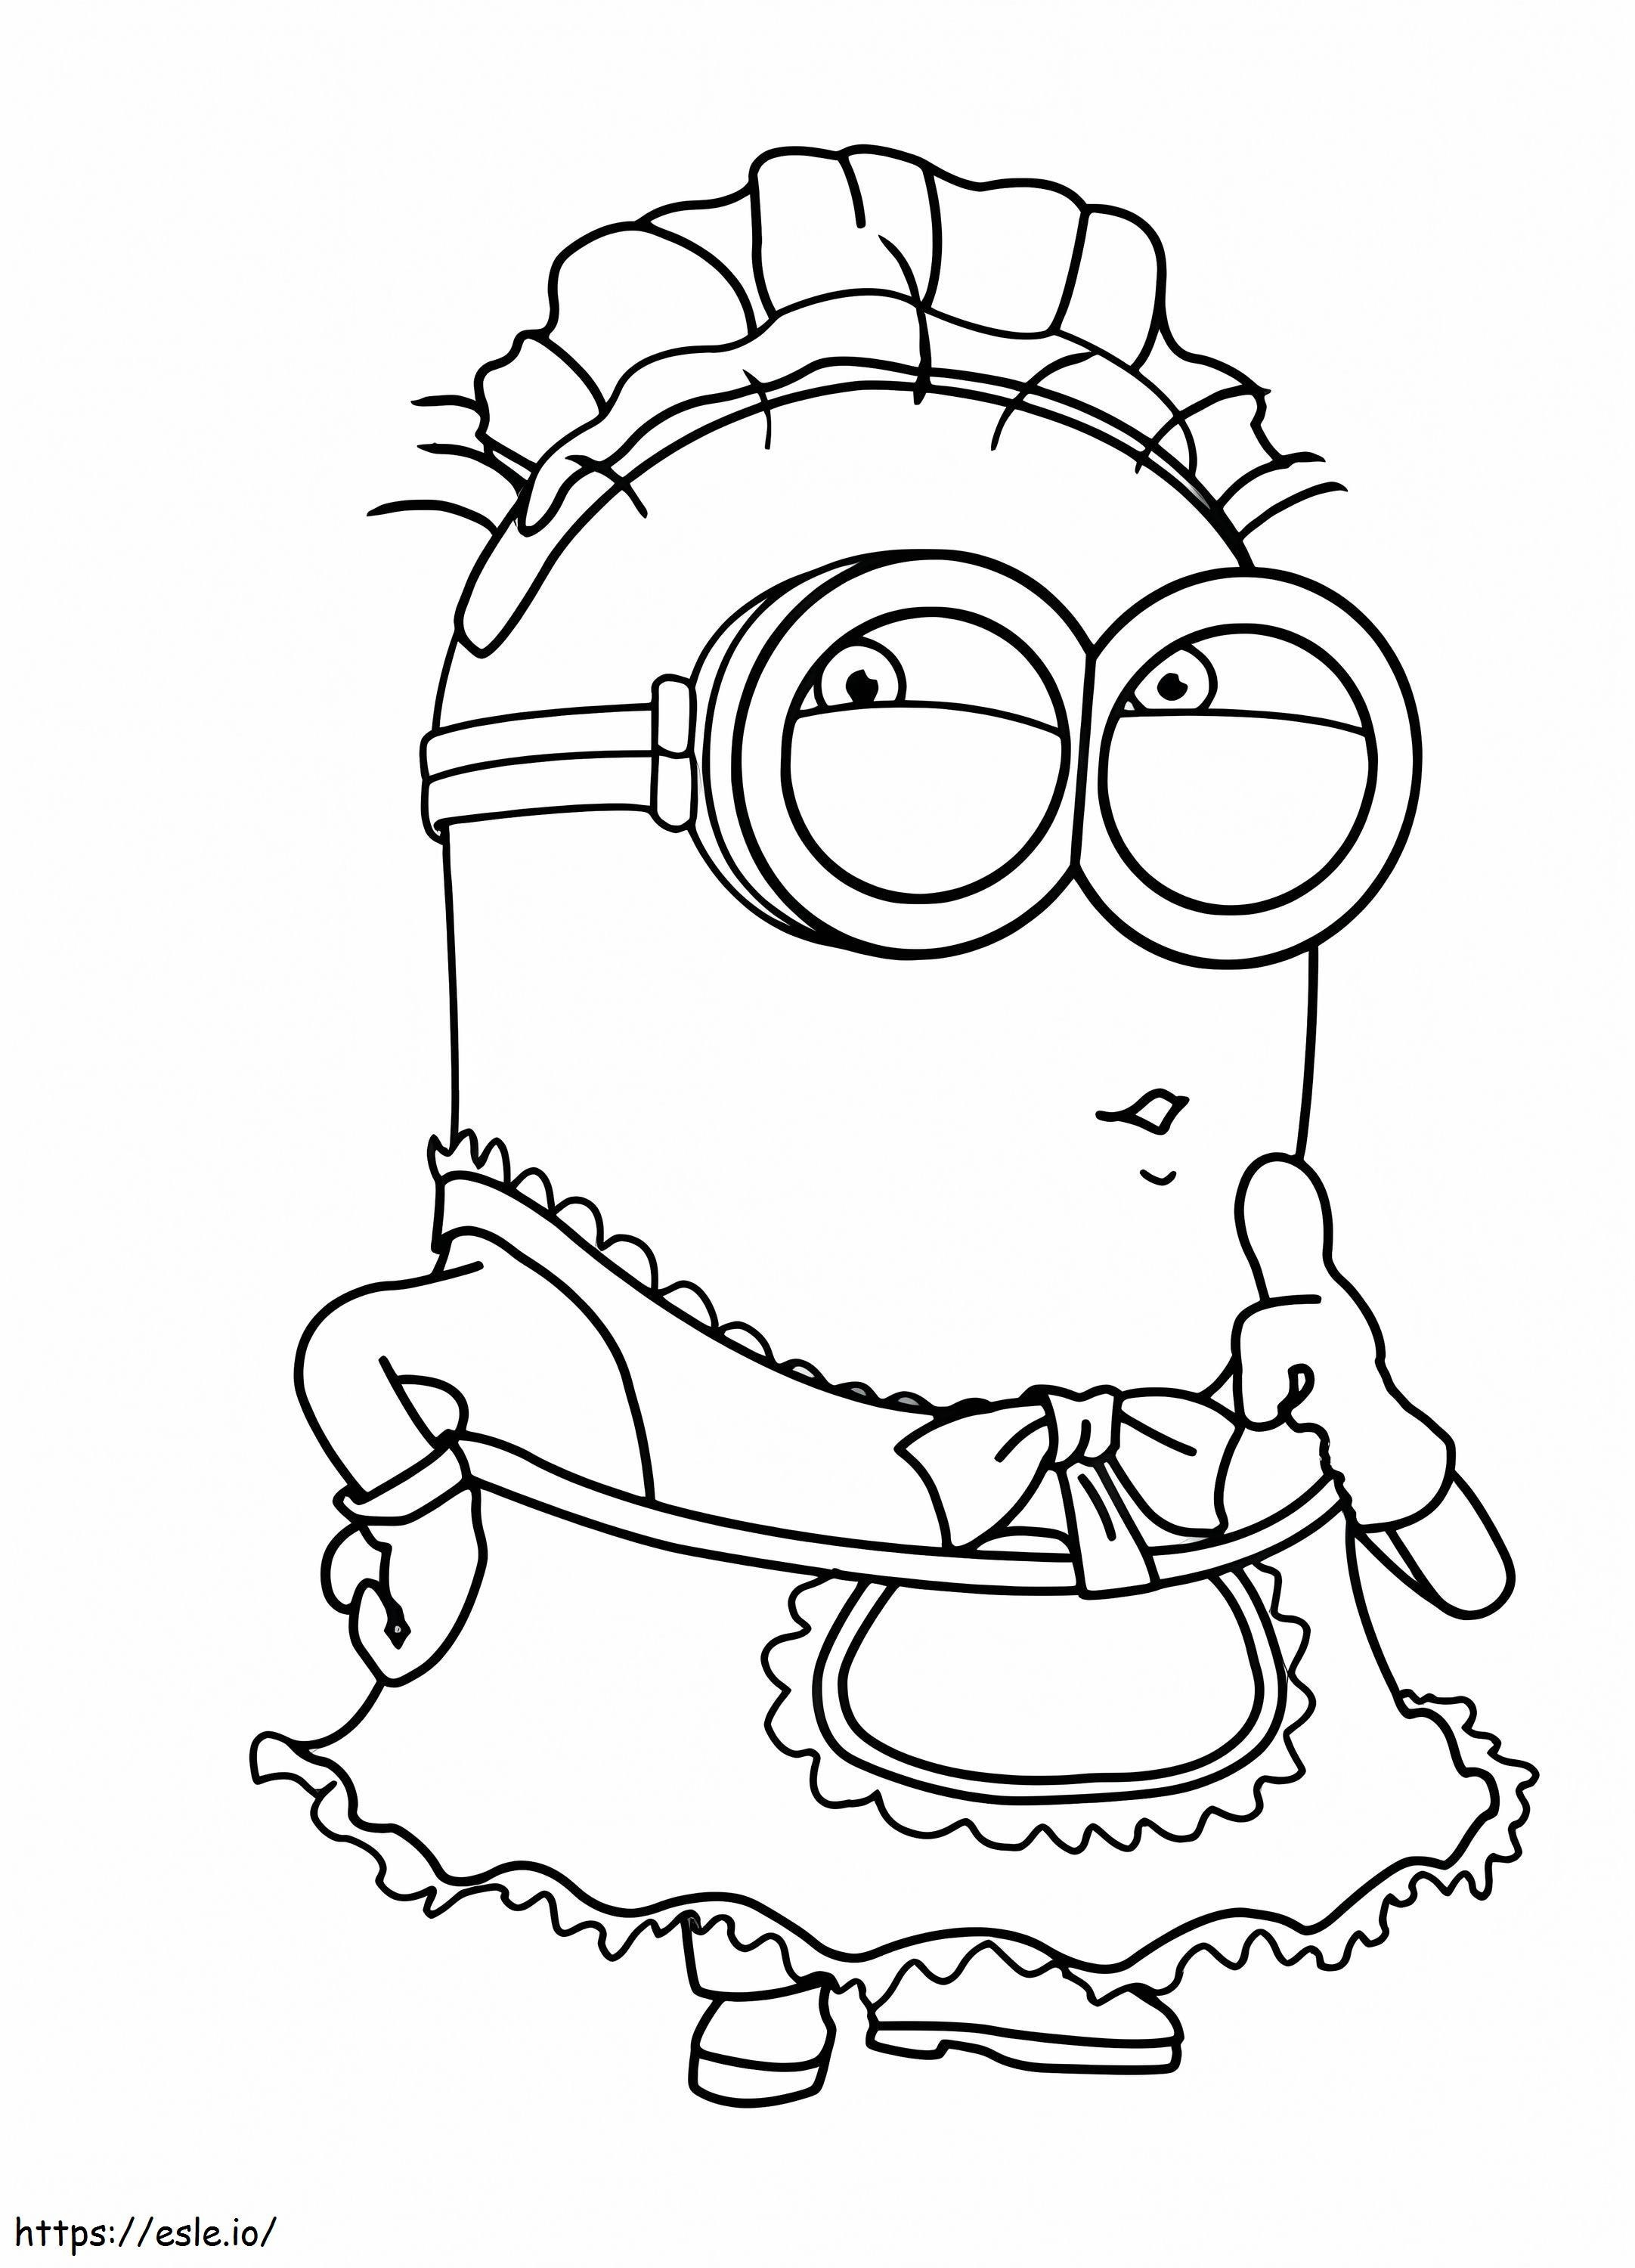 1539741274 Minion Halloween Printable With Chic Ideas Free Pic The Minions Page coloring page